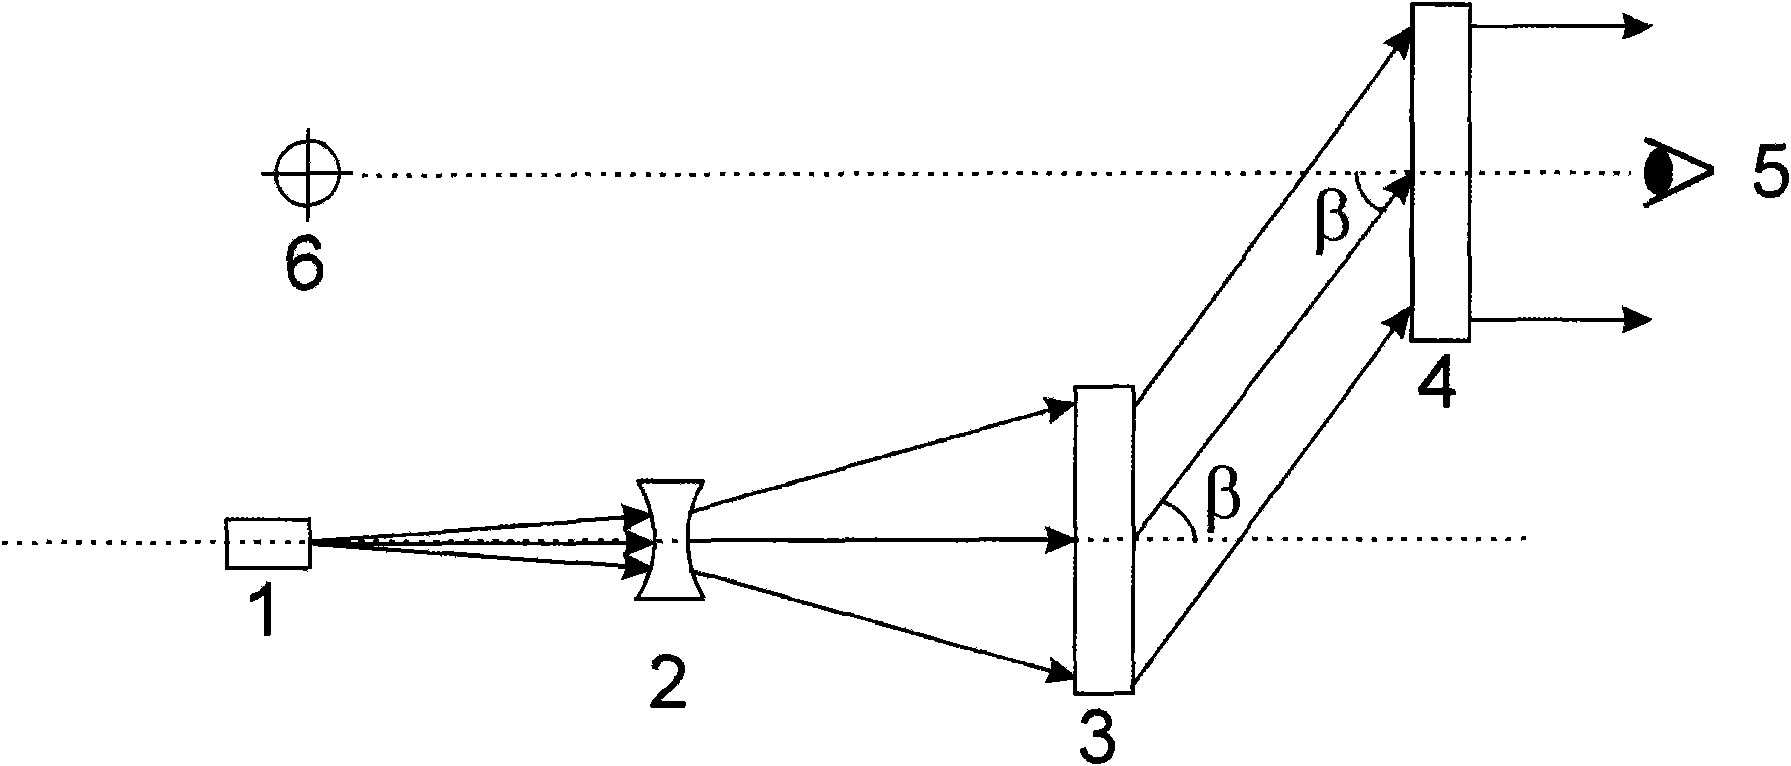 Compact matching type holographic aiming device optical system